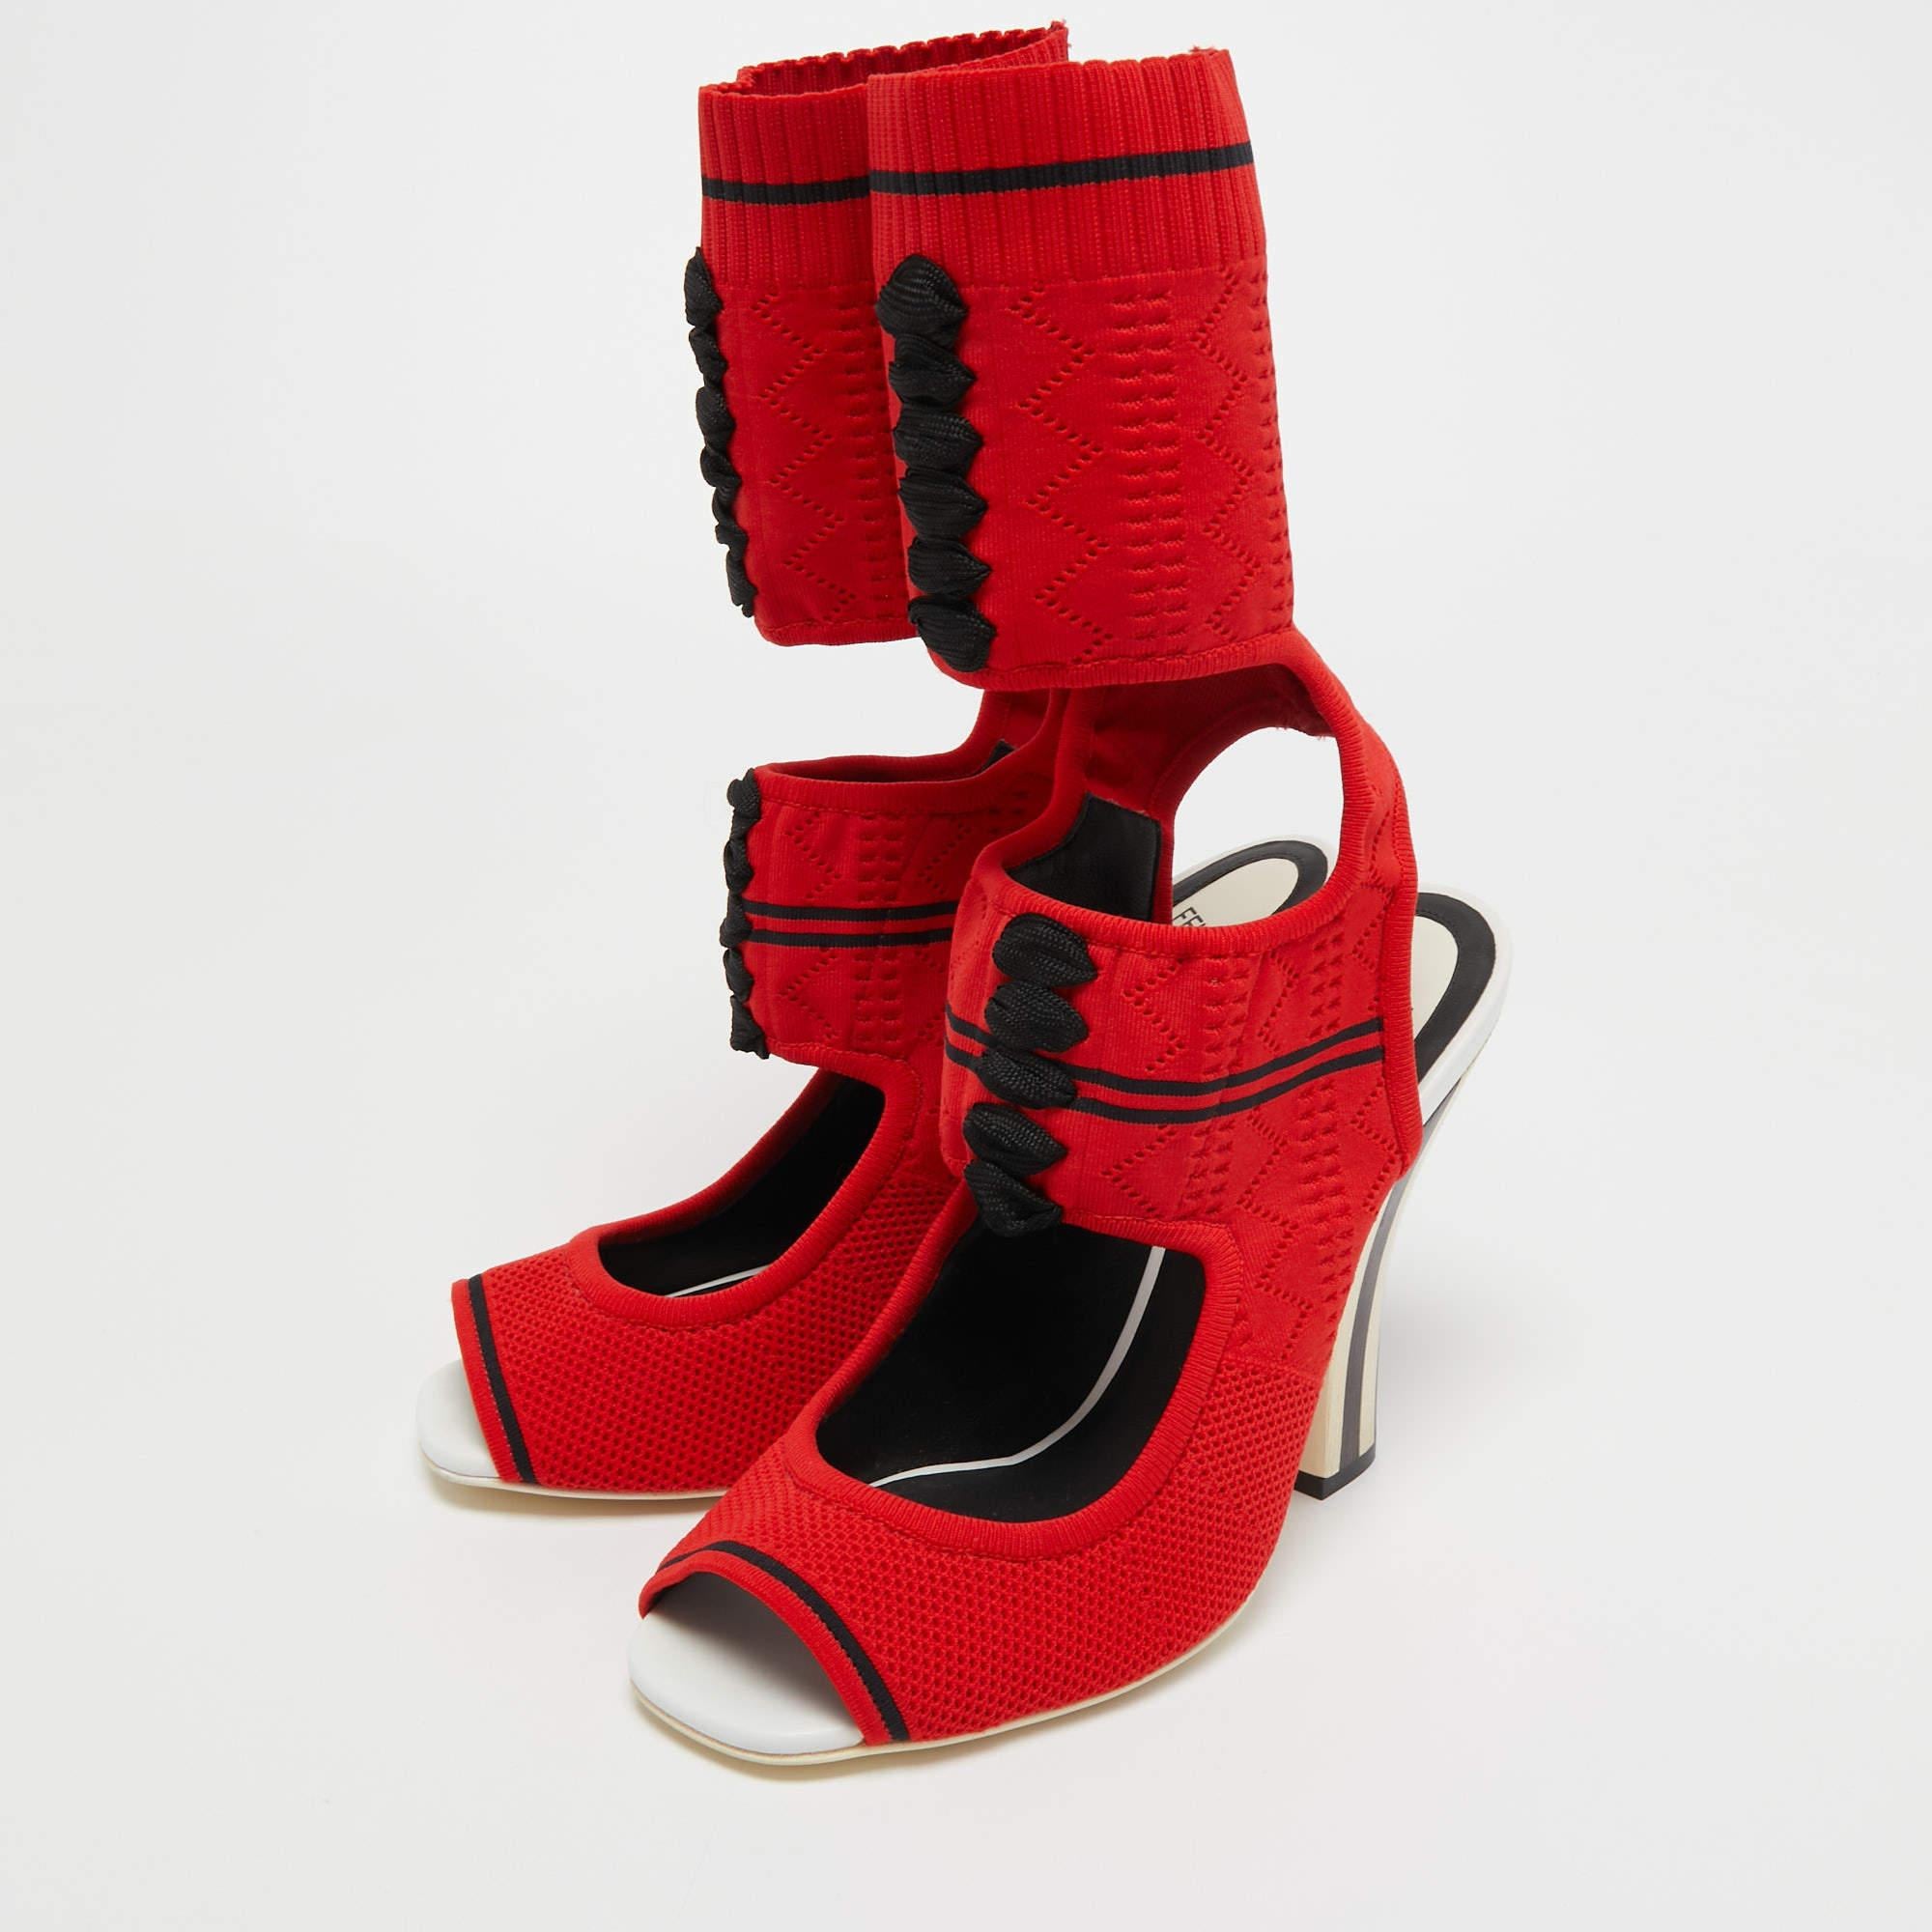 Women's Fendi Red Knit Fabric Peep Toe Cut Out Sandals Size 40 For Sale